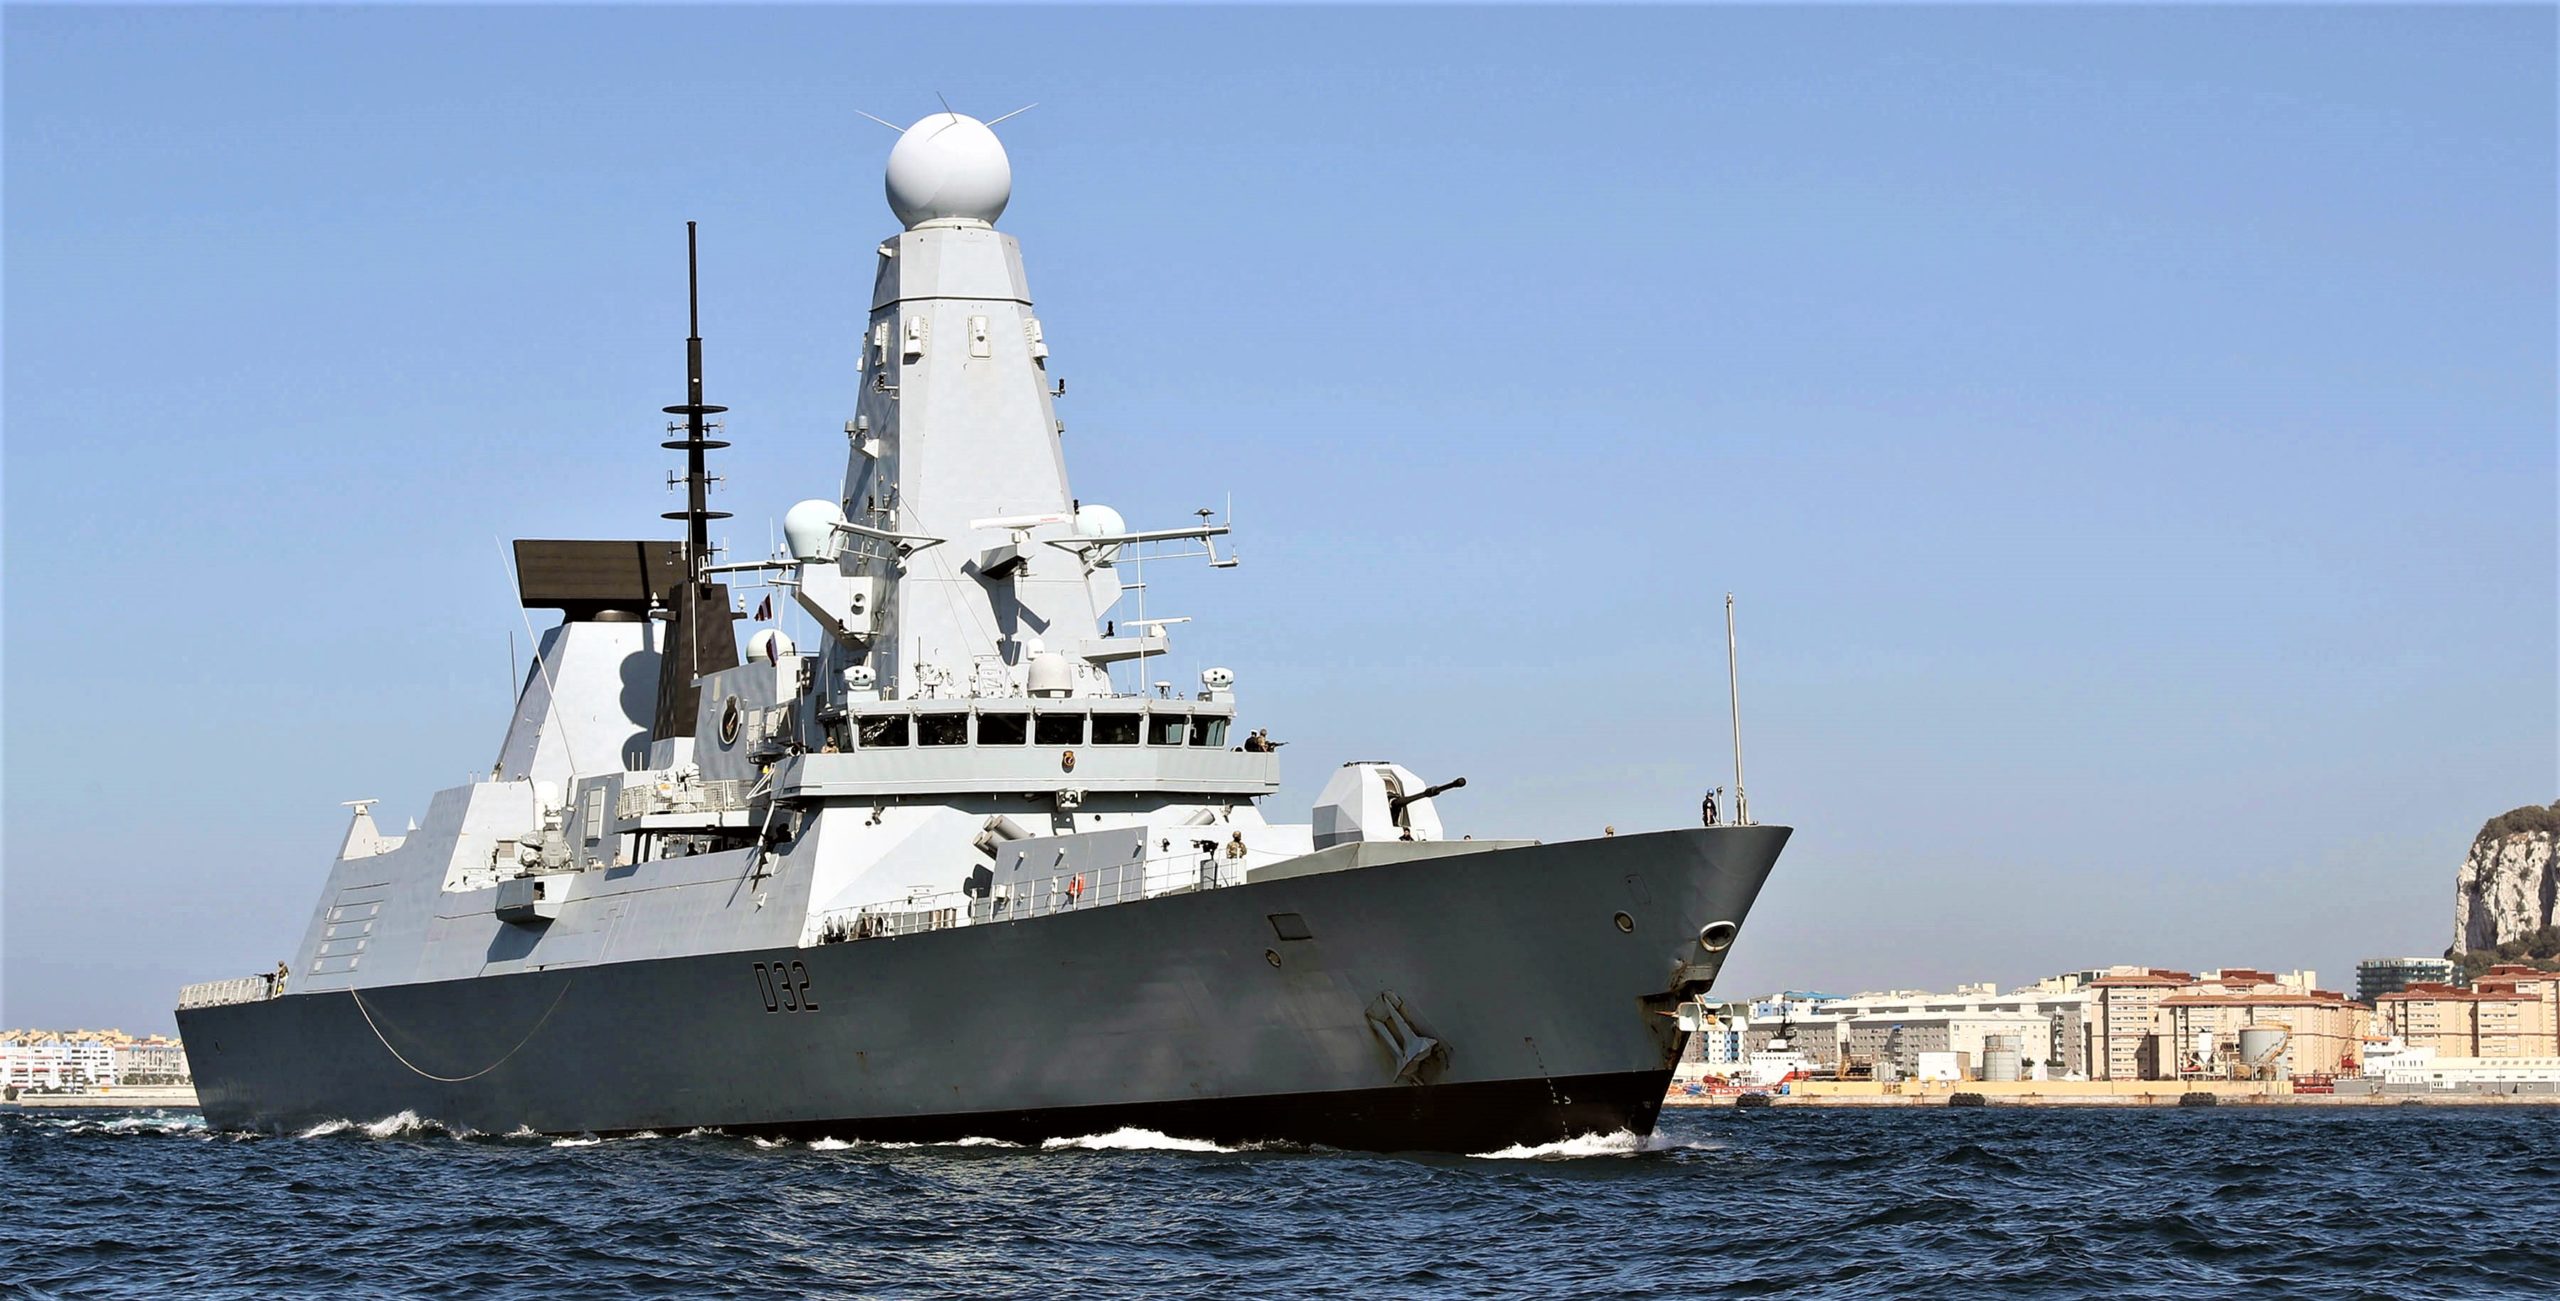 SDE continue to provide Type 45 Explosive Safety Support